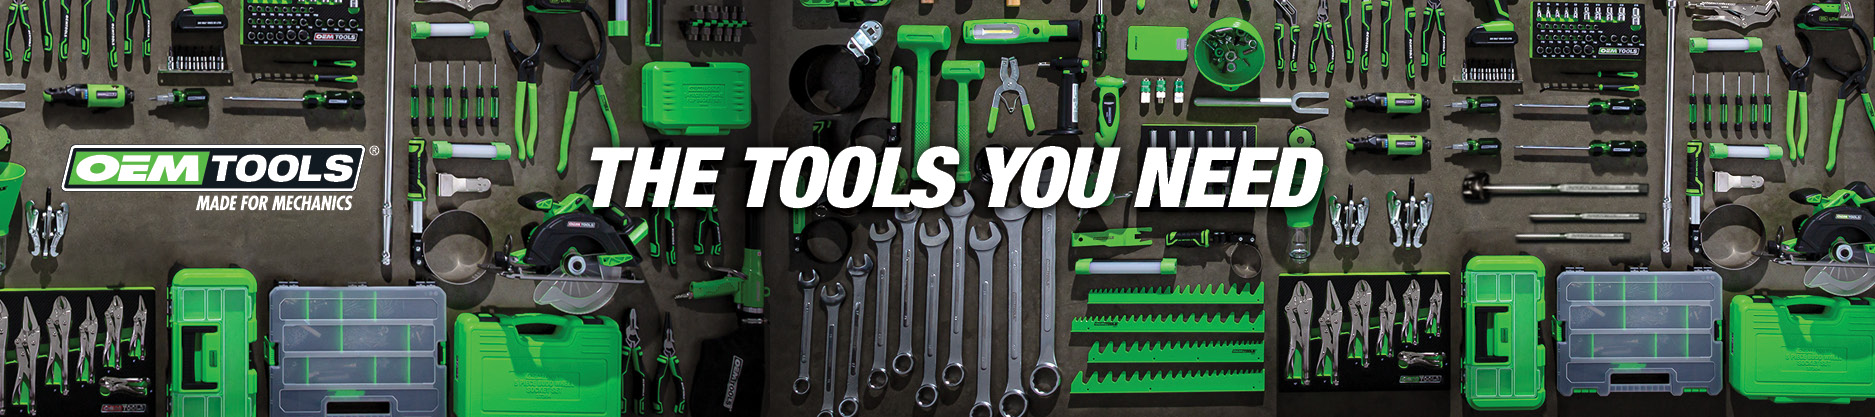 OEMTOOLS The Tools You Need